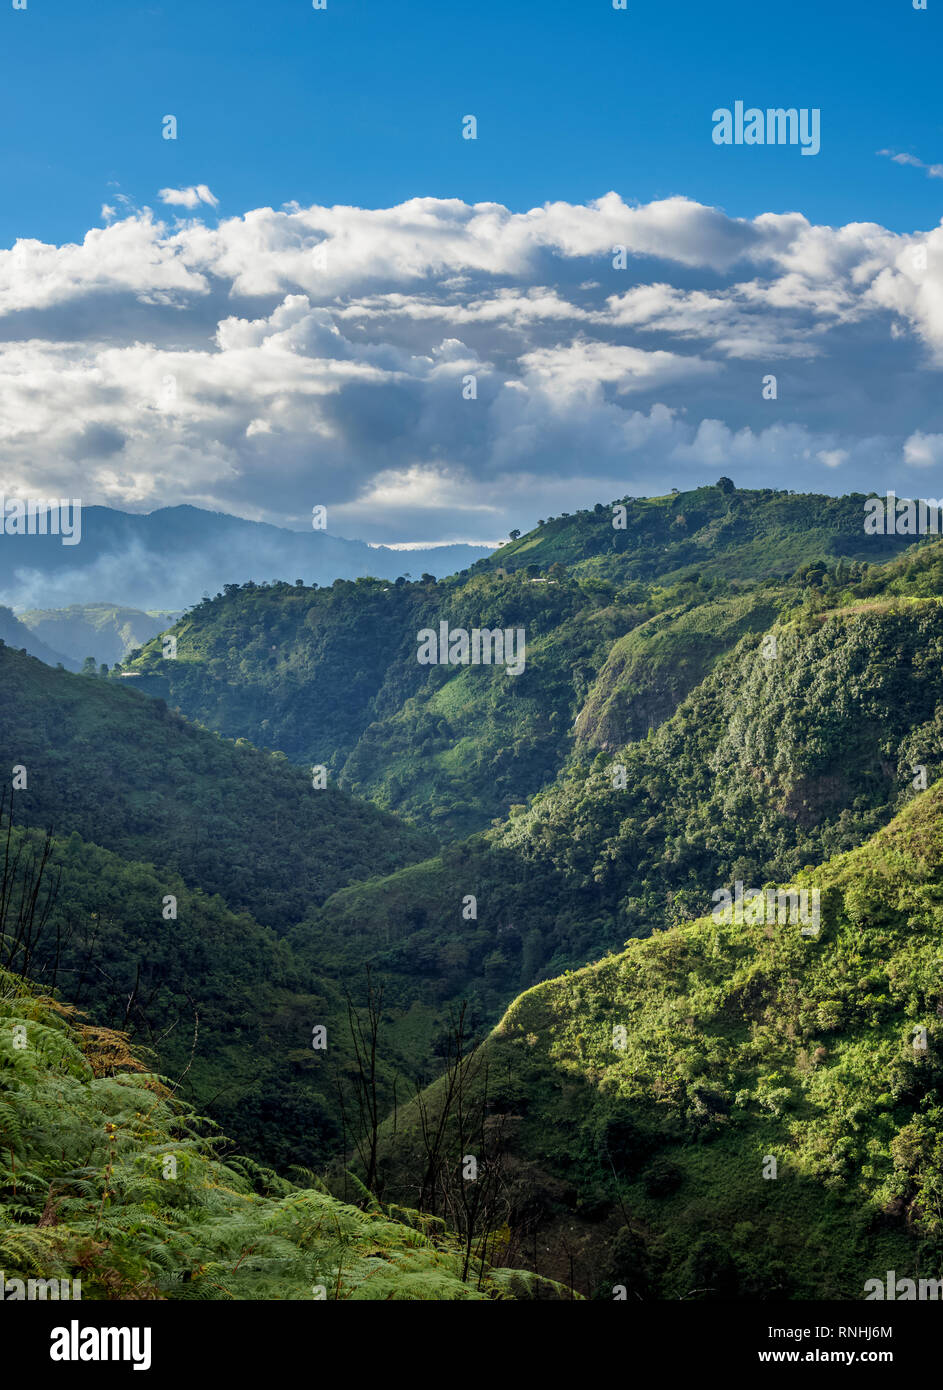 Huila department colombia hi-res stock photography and images - Alamy